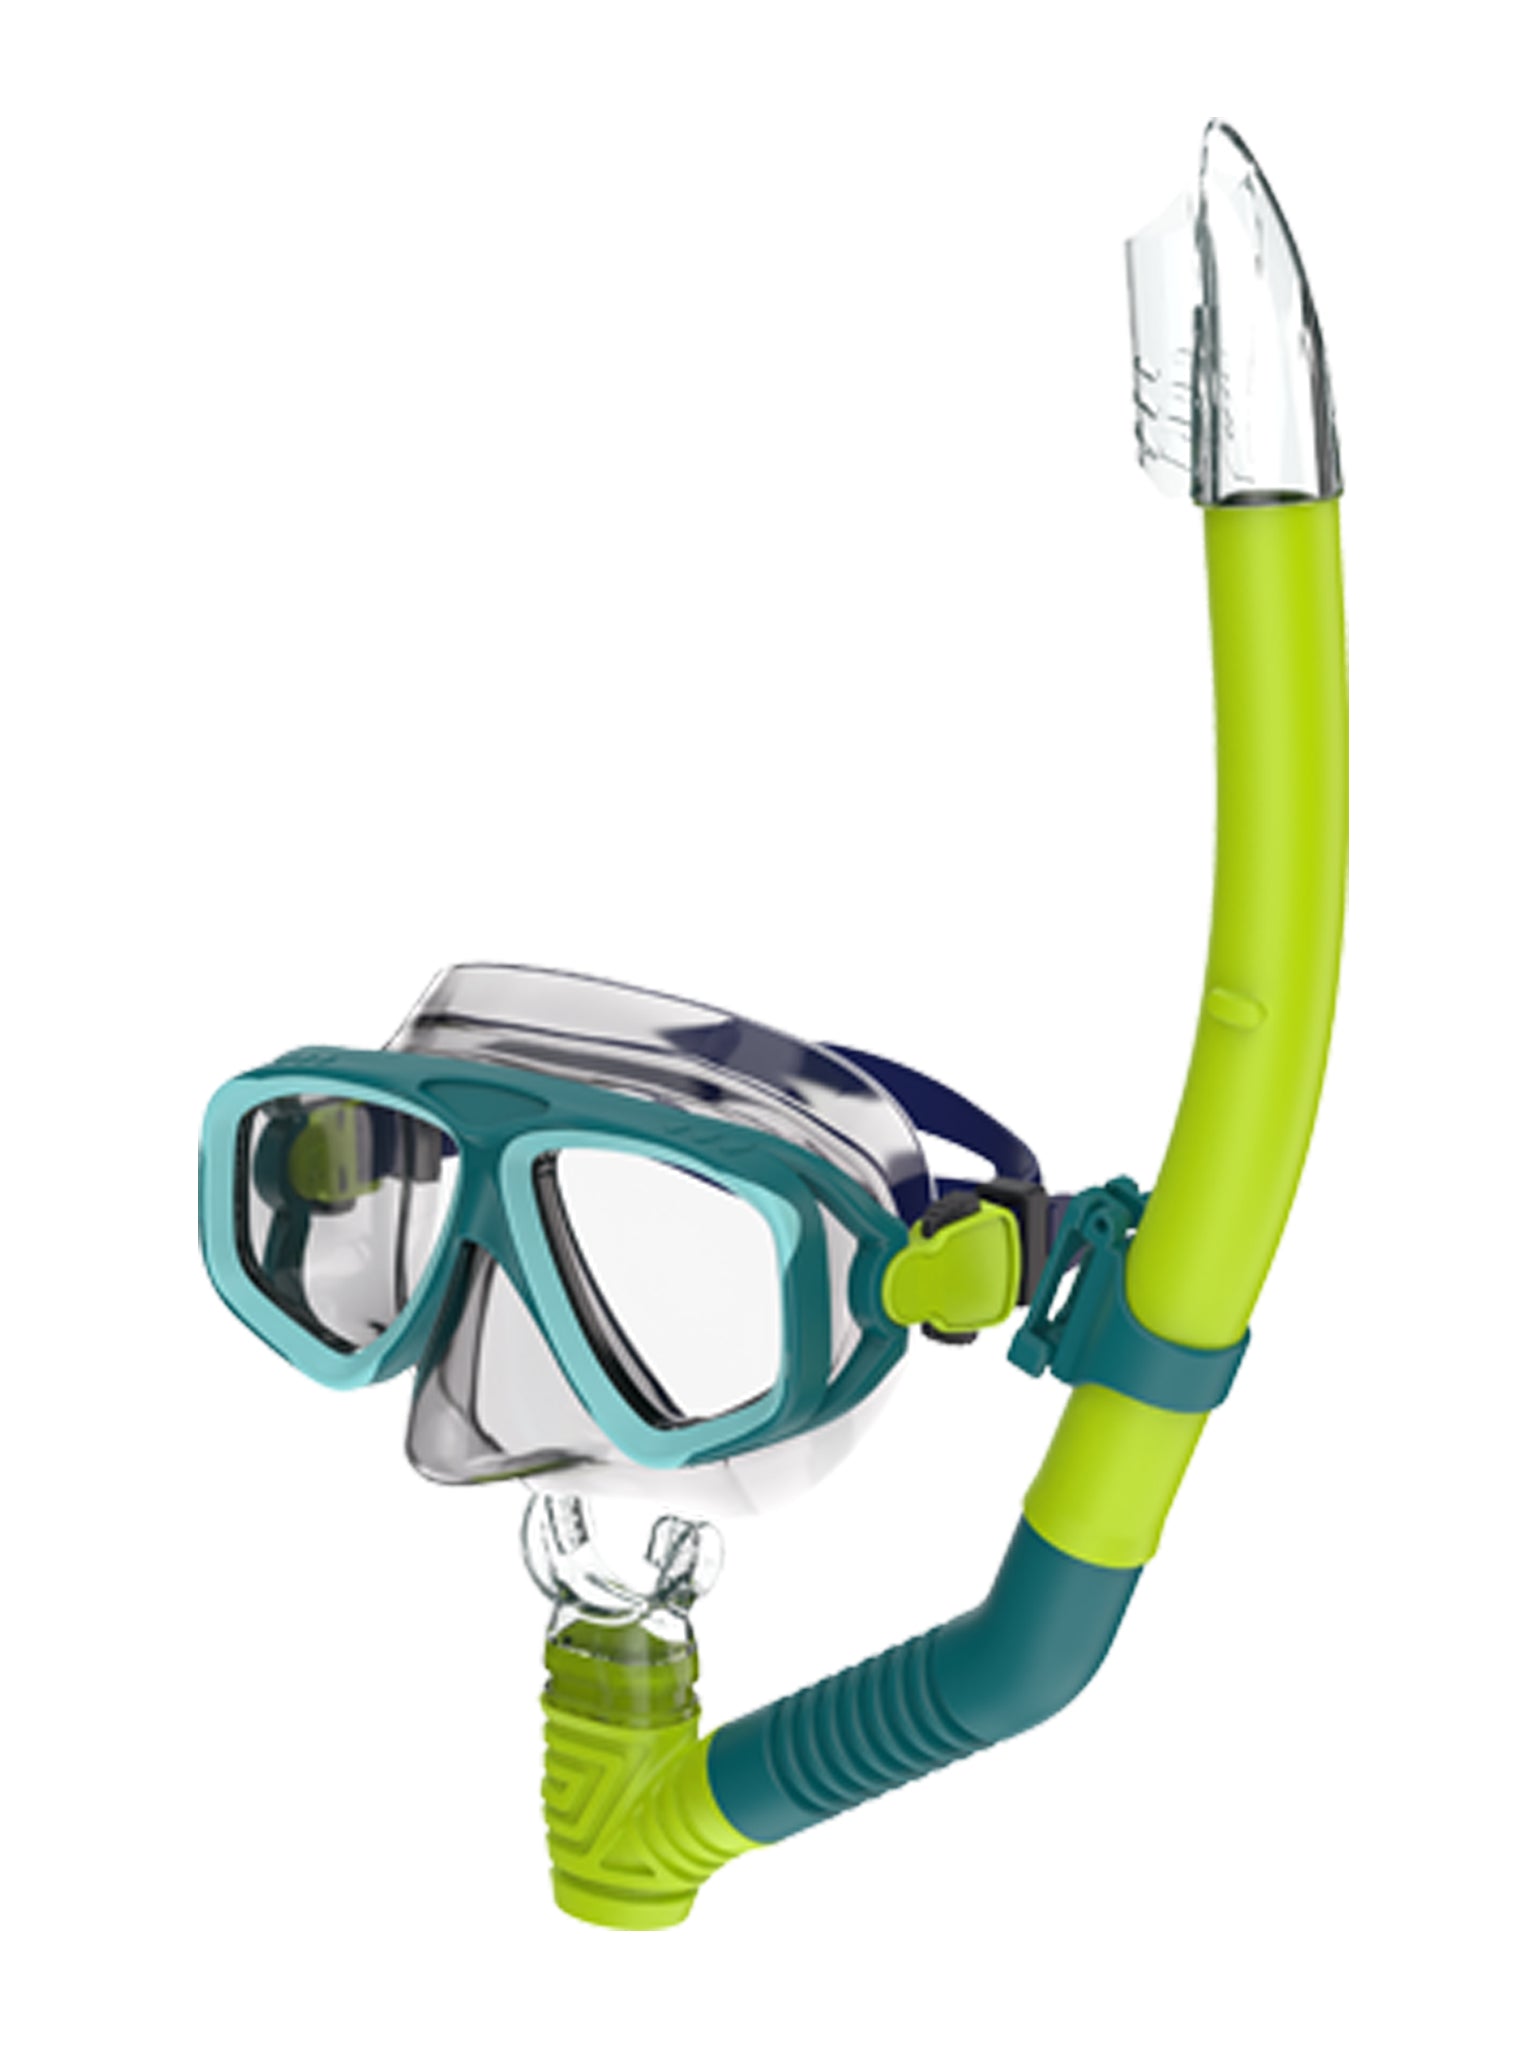 Adult Adventure Mask and Snorkel Set - Green